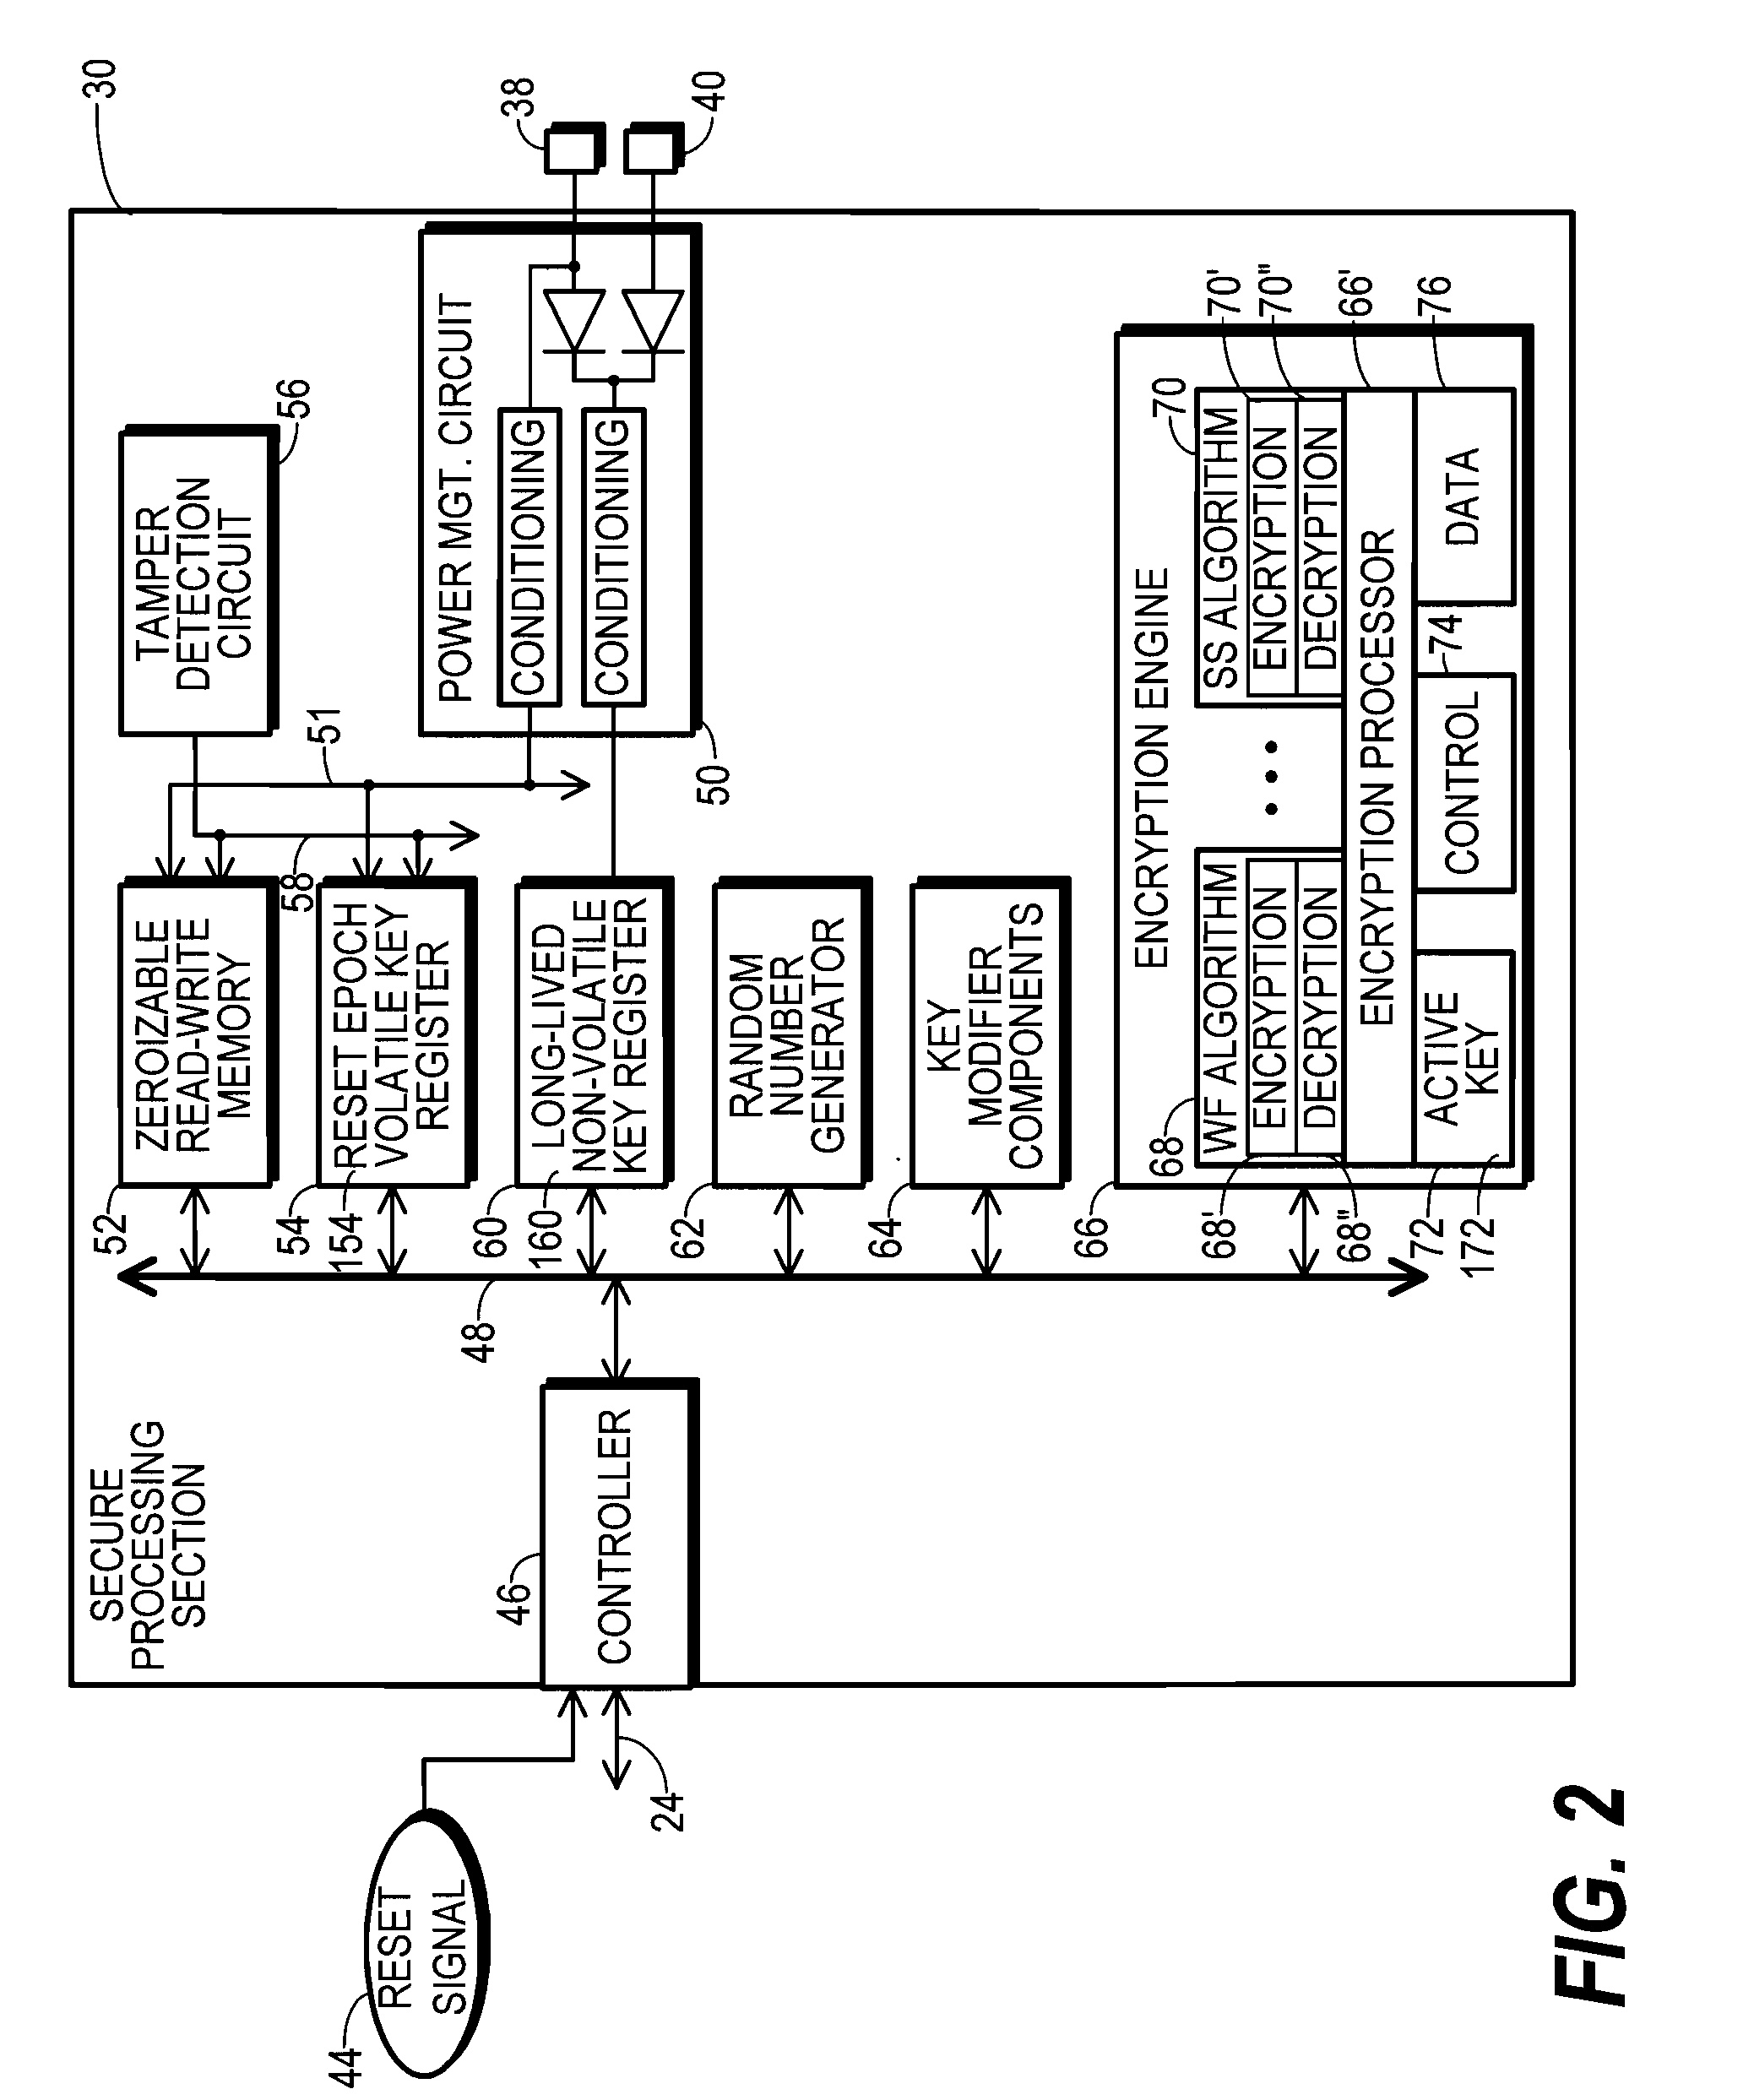 Encryption apparatus and method therefor